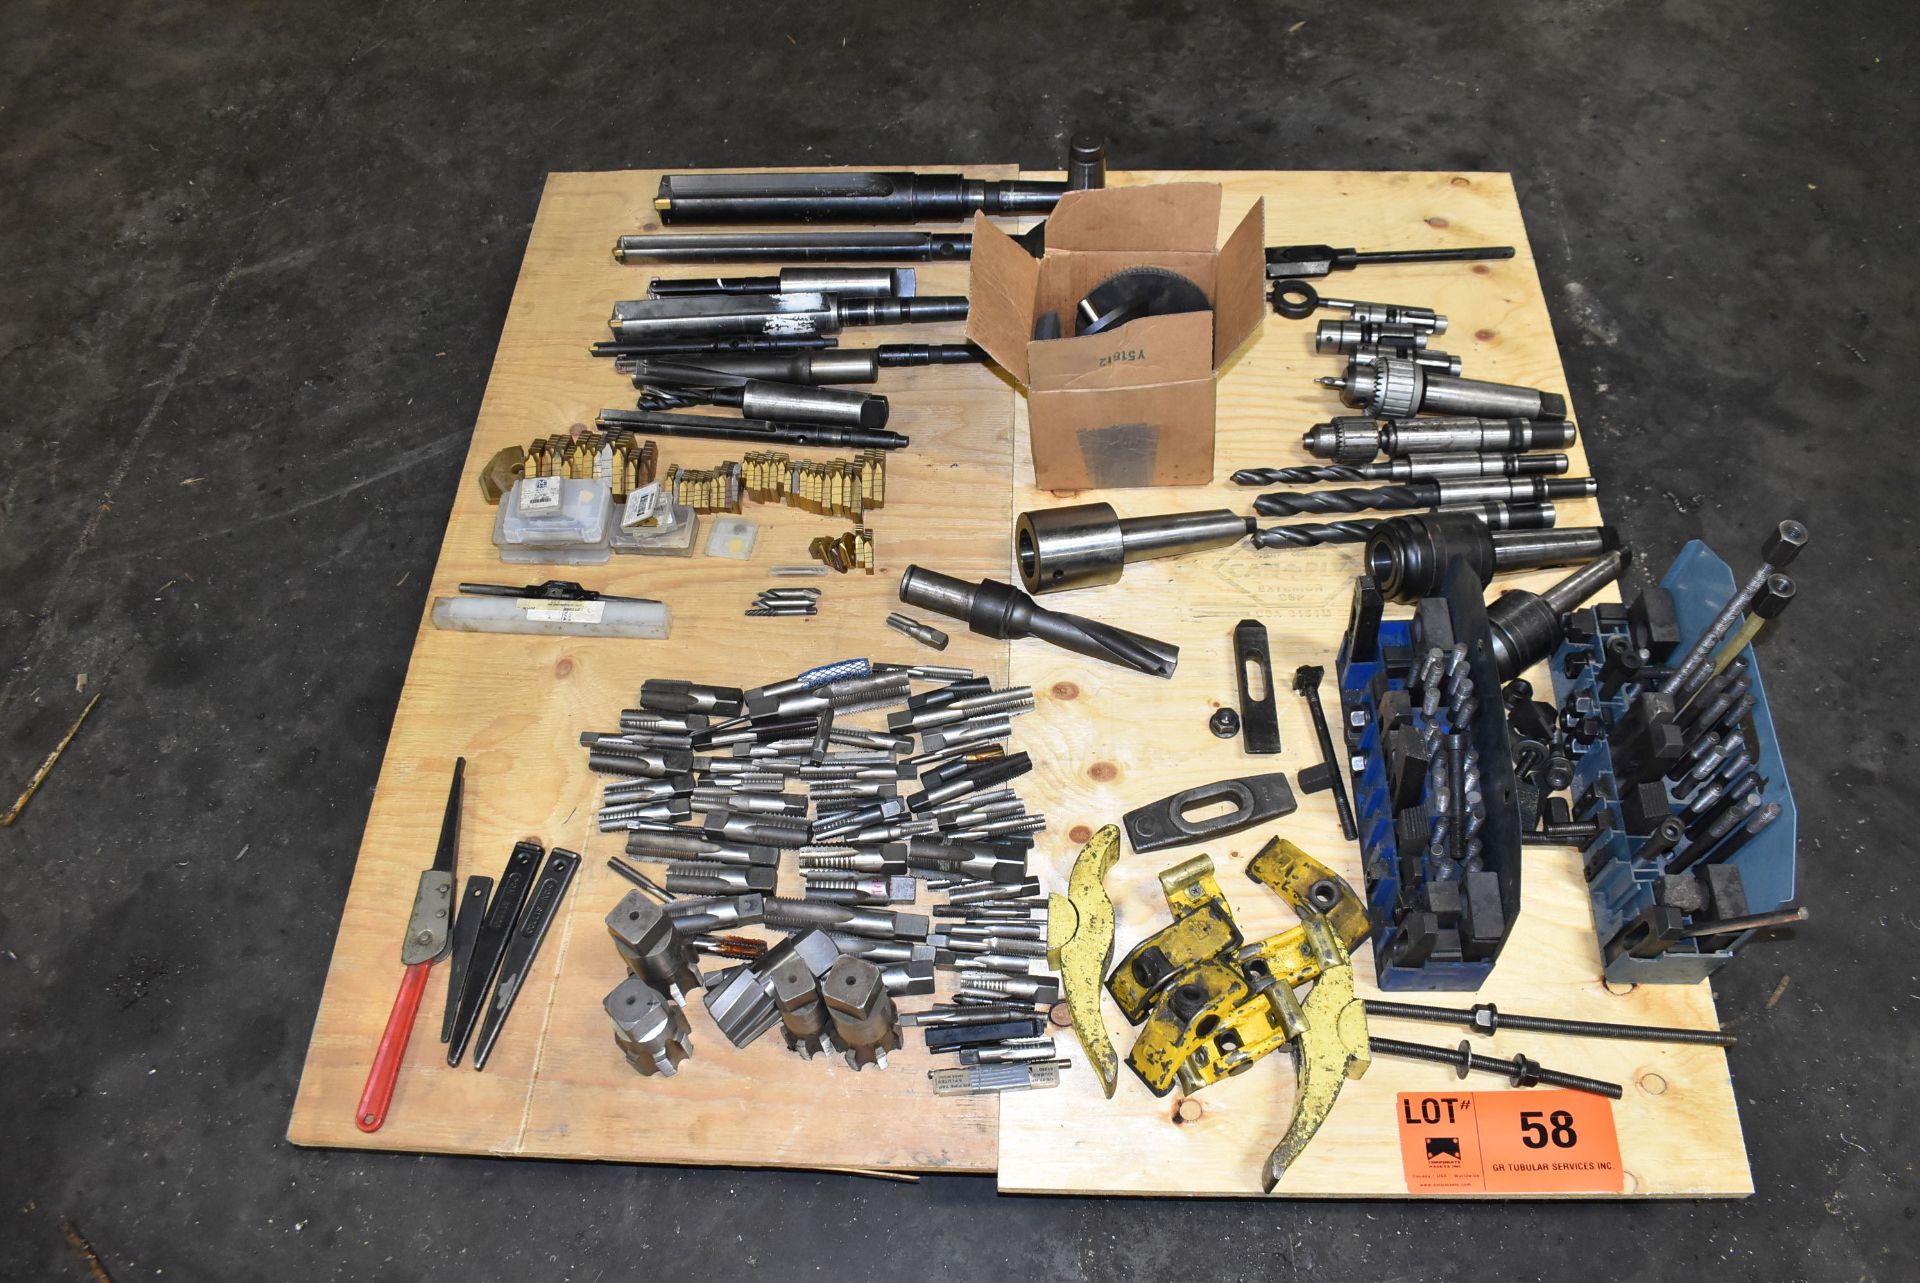 LOT/ CONTENTS OF PALLET CONSISTING OF TAPS, DRILLS AND TIE DOWN CLAMPING